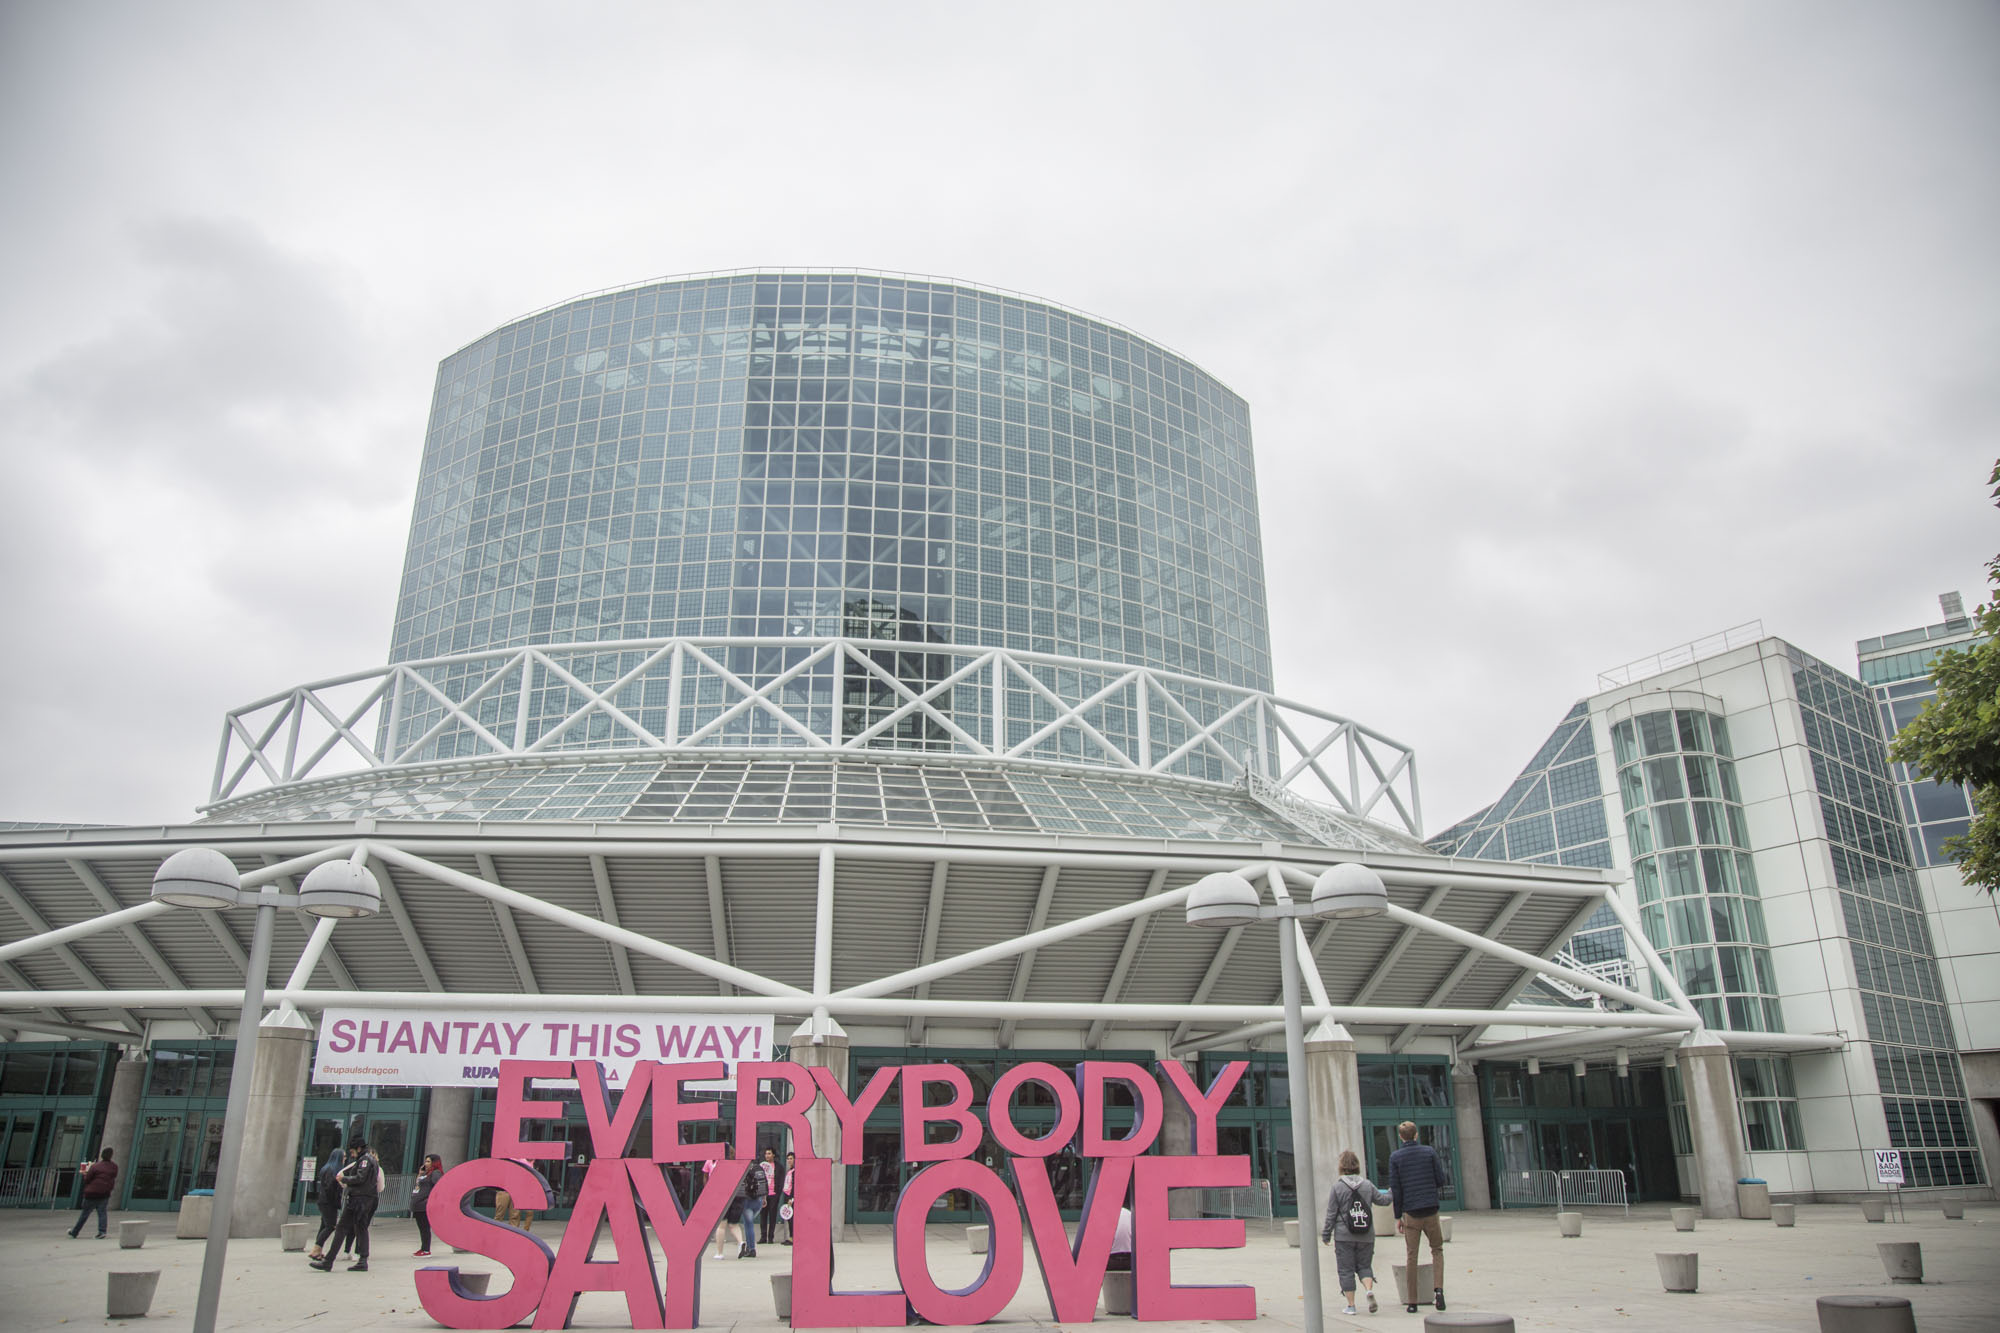  An ‘Everybody Say Love’ sign stands in front of the Los Angeles Convention Center on the opening day of RuPaul’s DragCon LA 2018 on May 11, 2018 in Los Angeles, Calif. 